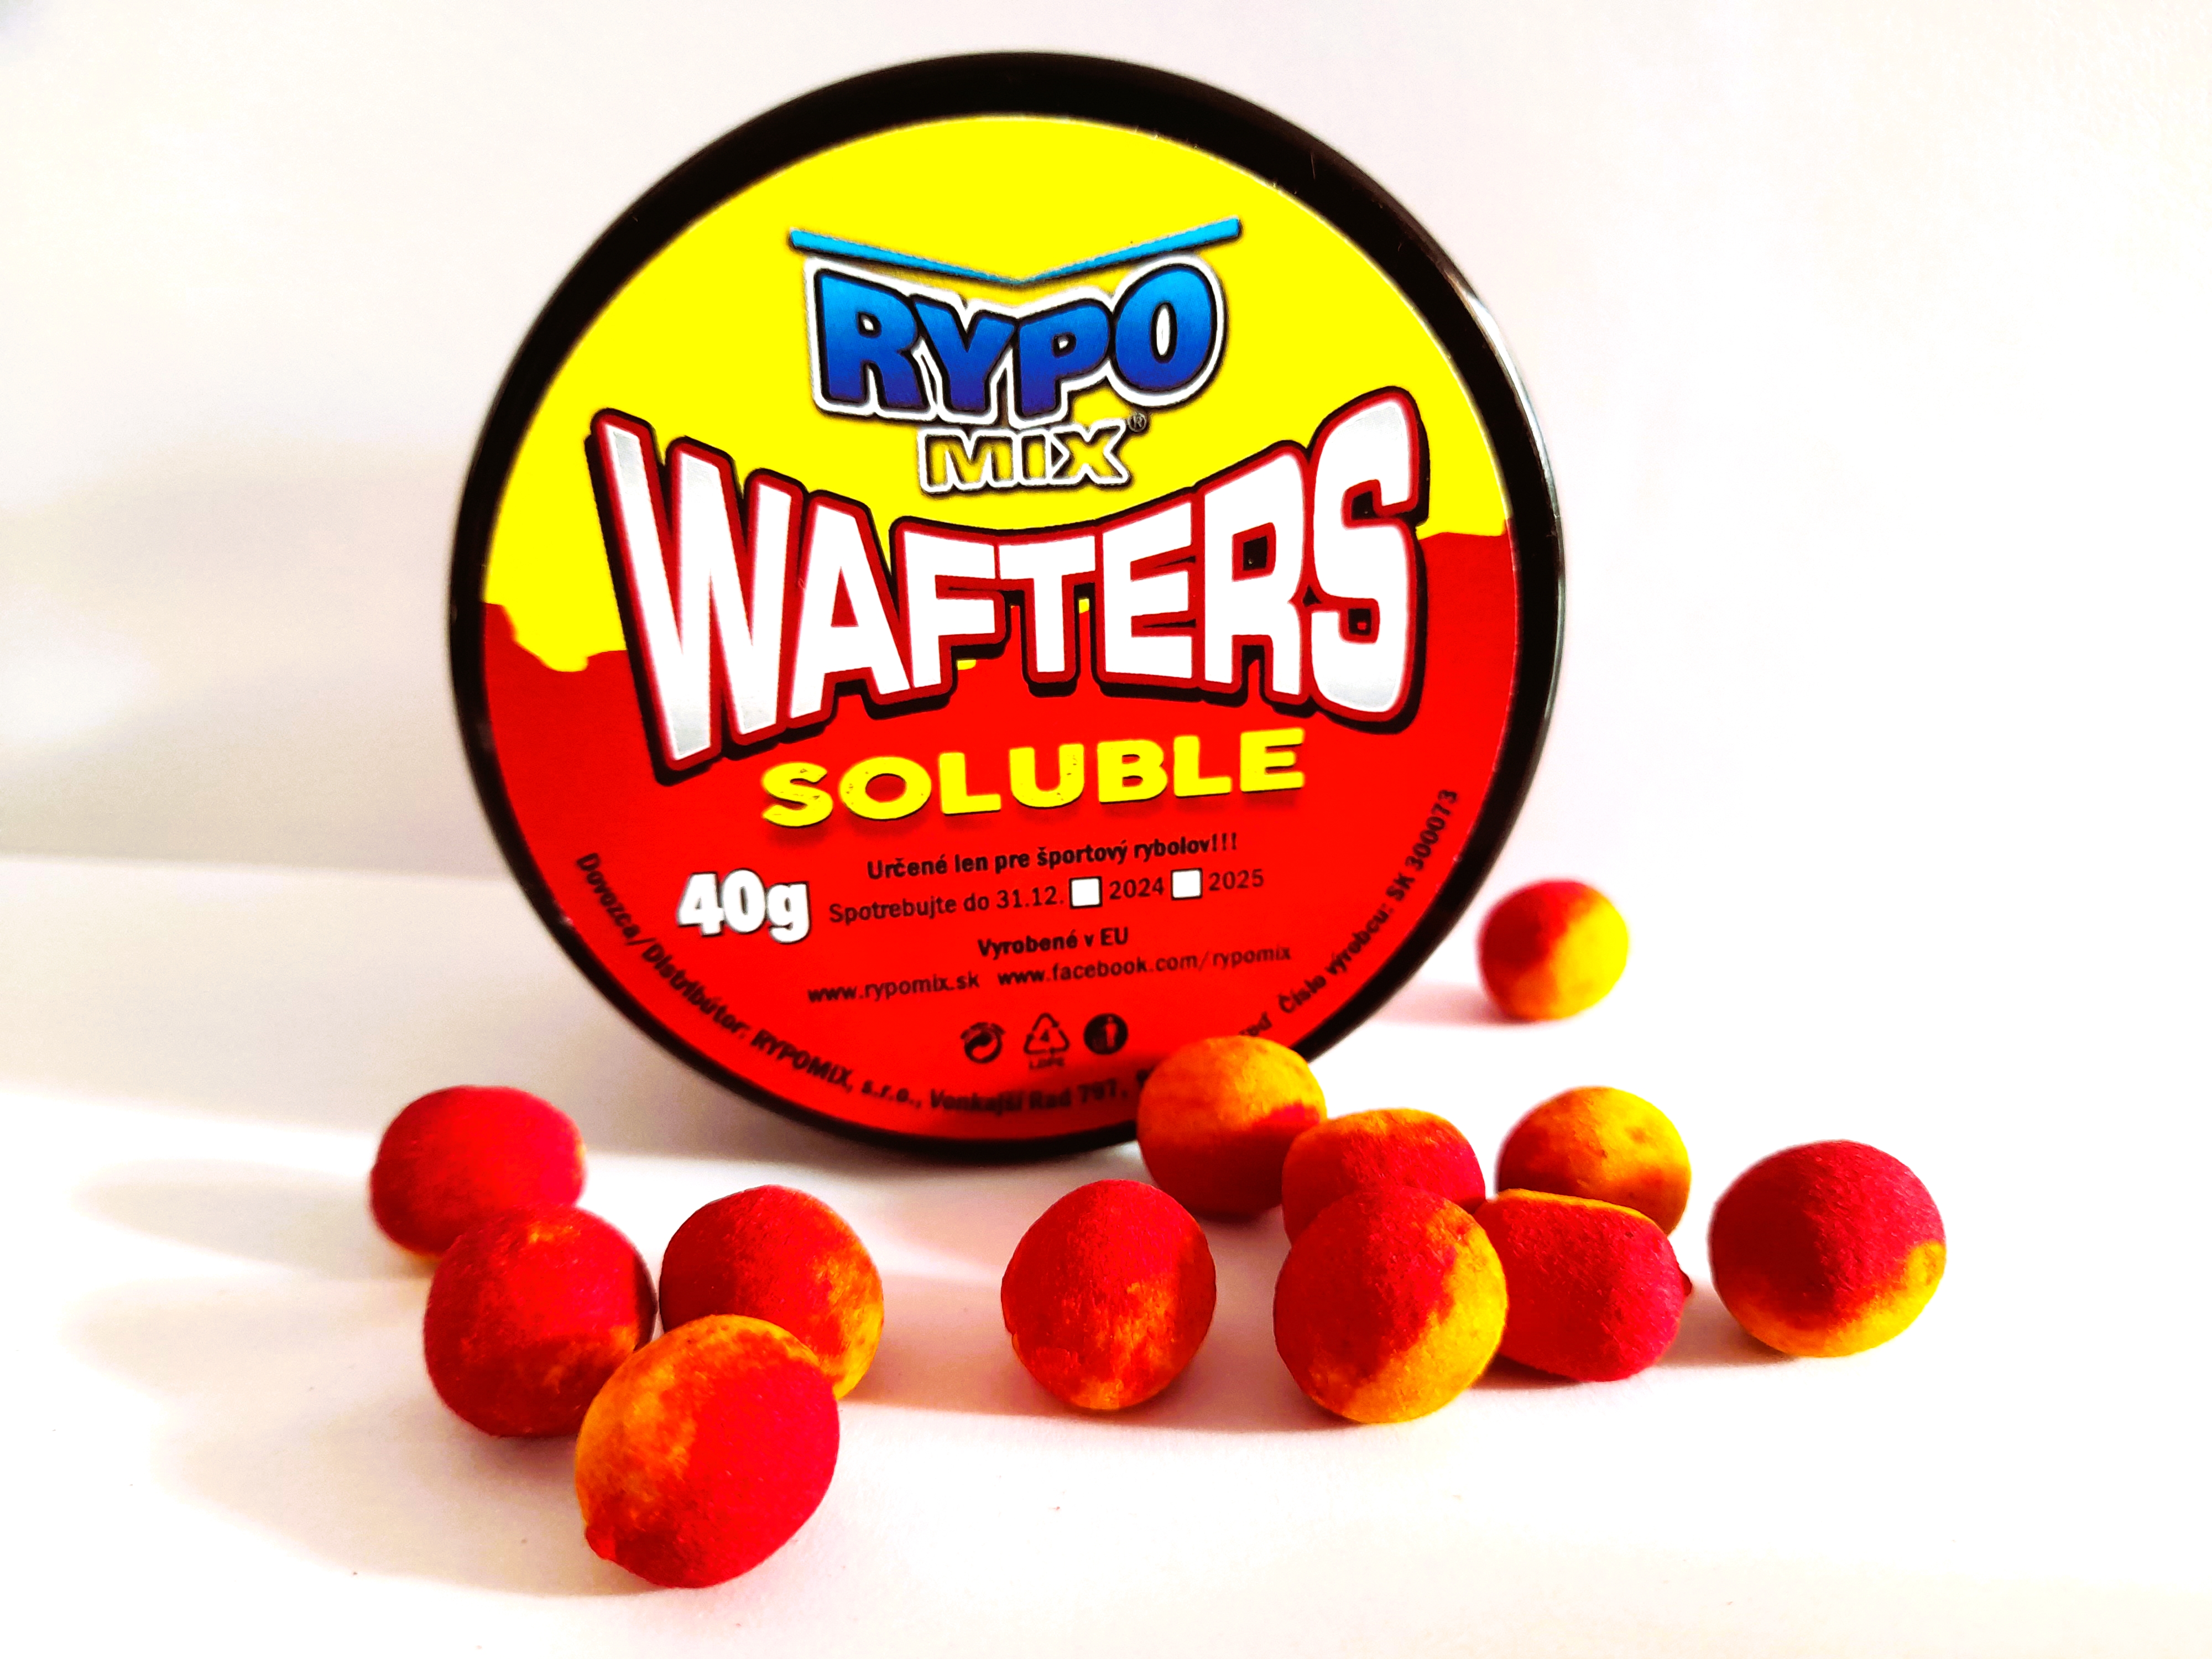 WAFTERS Soluble 40g